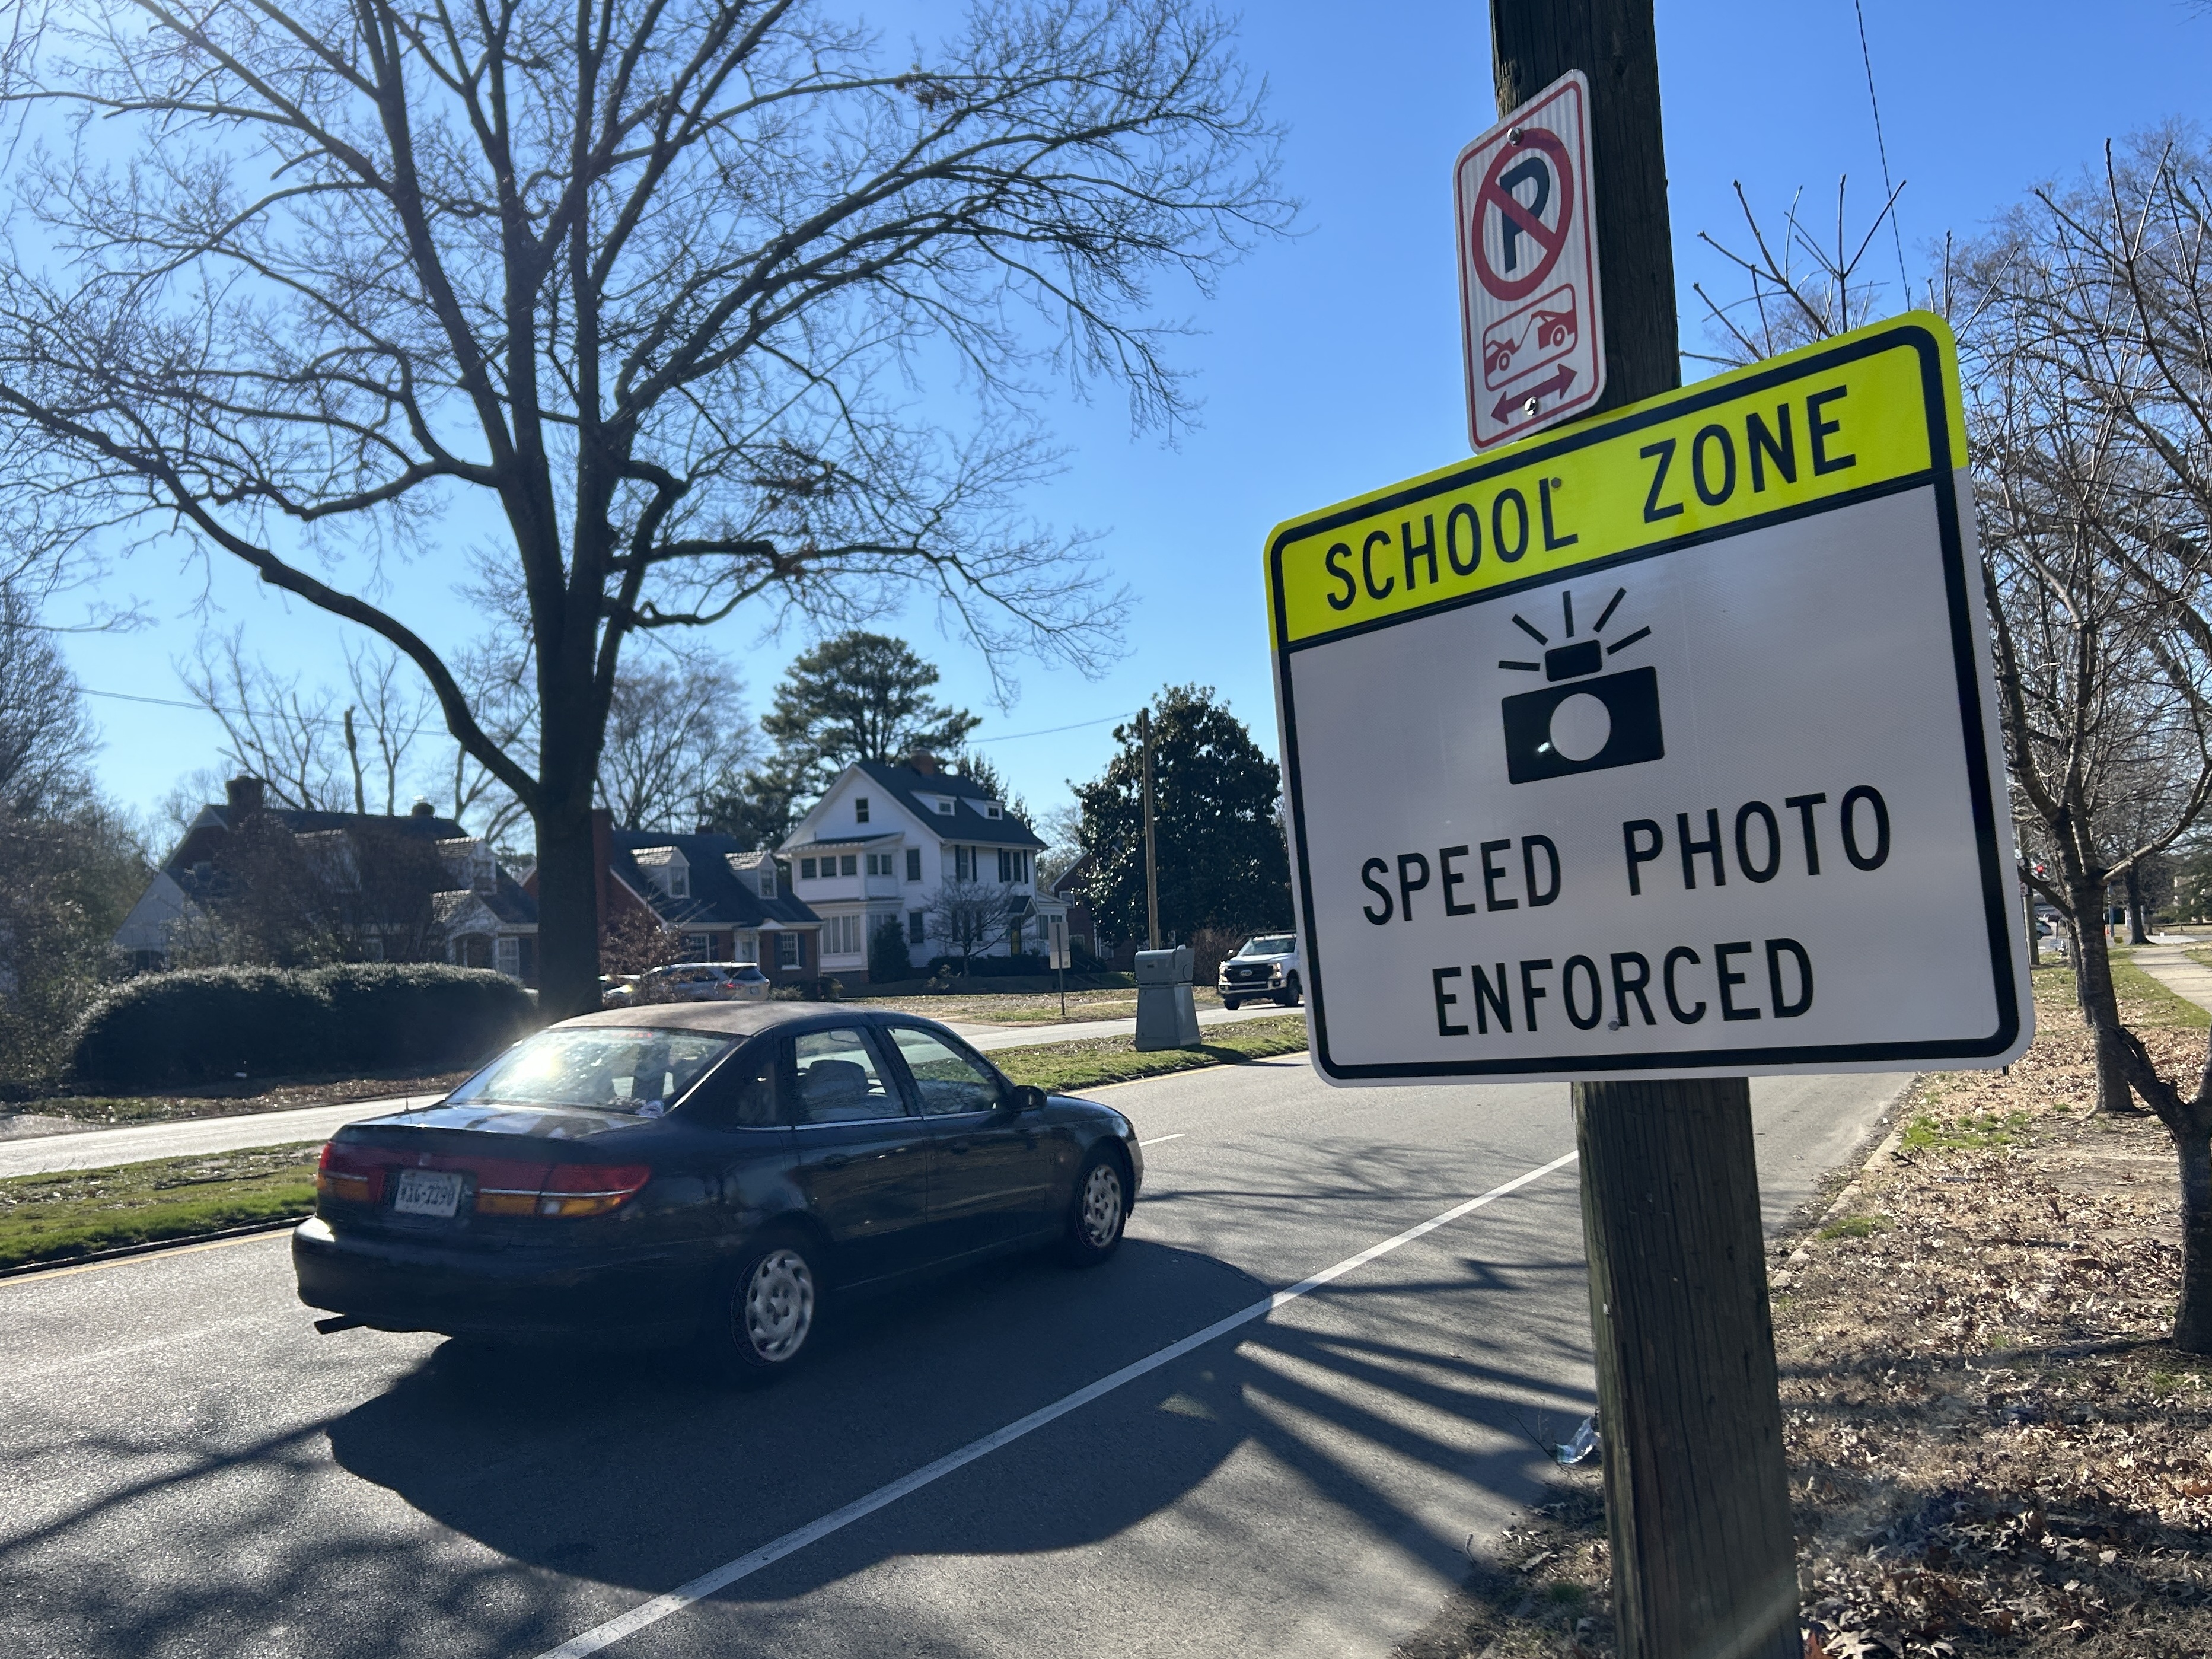 Richmond, Va., joins a growing list of cities that have installed automated enforcement cameras in an effort to cut down on speeding.